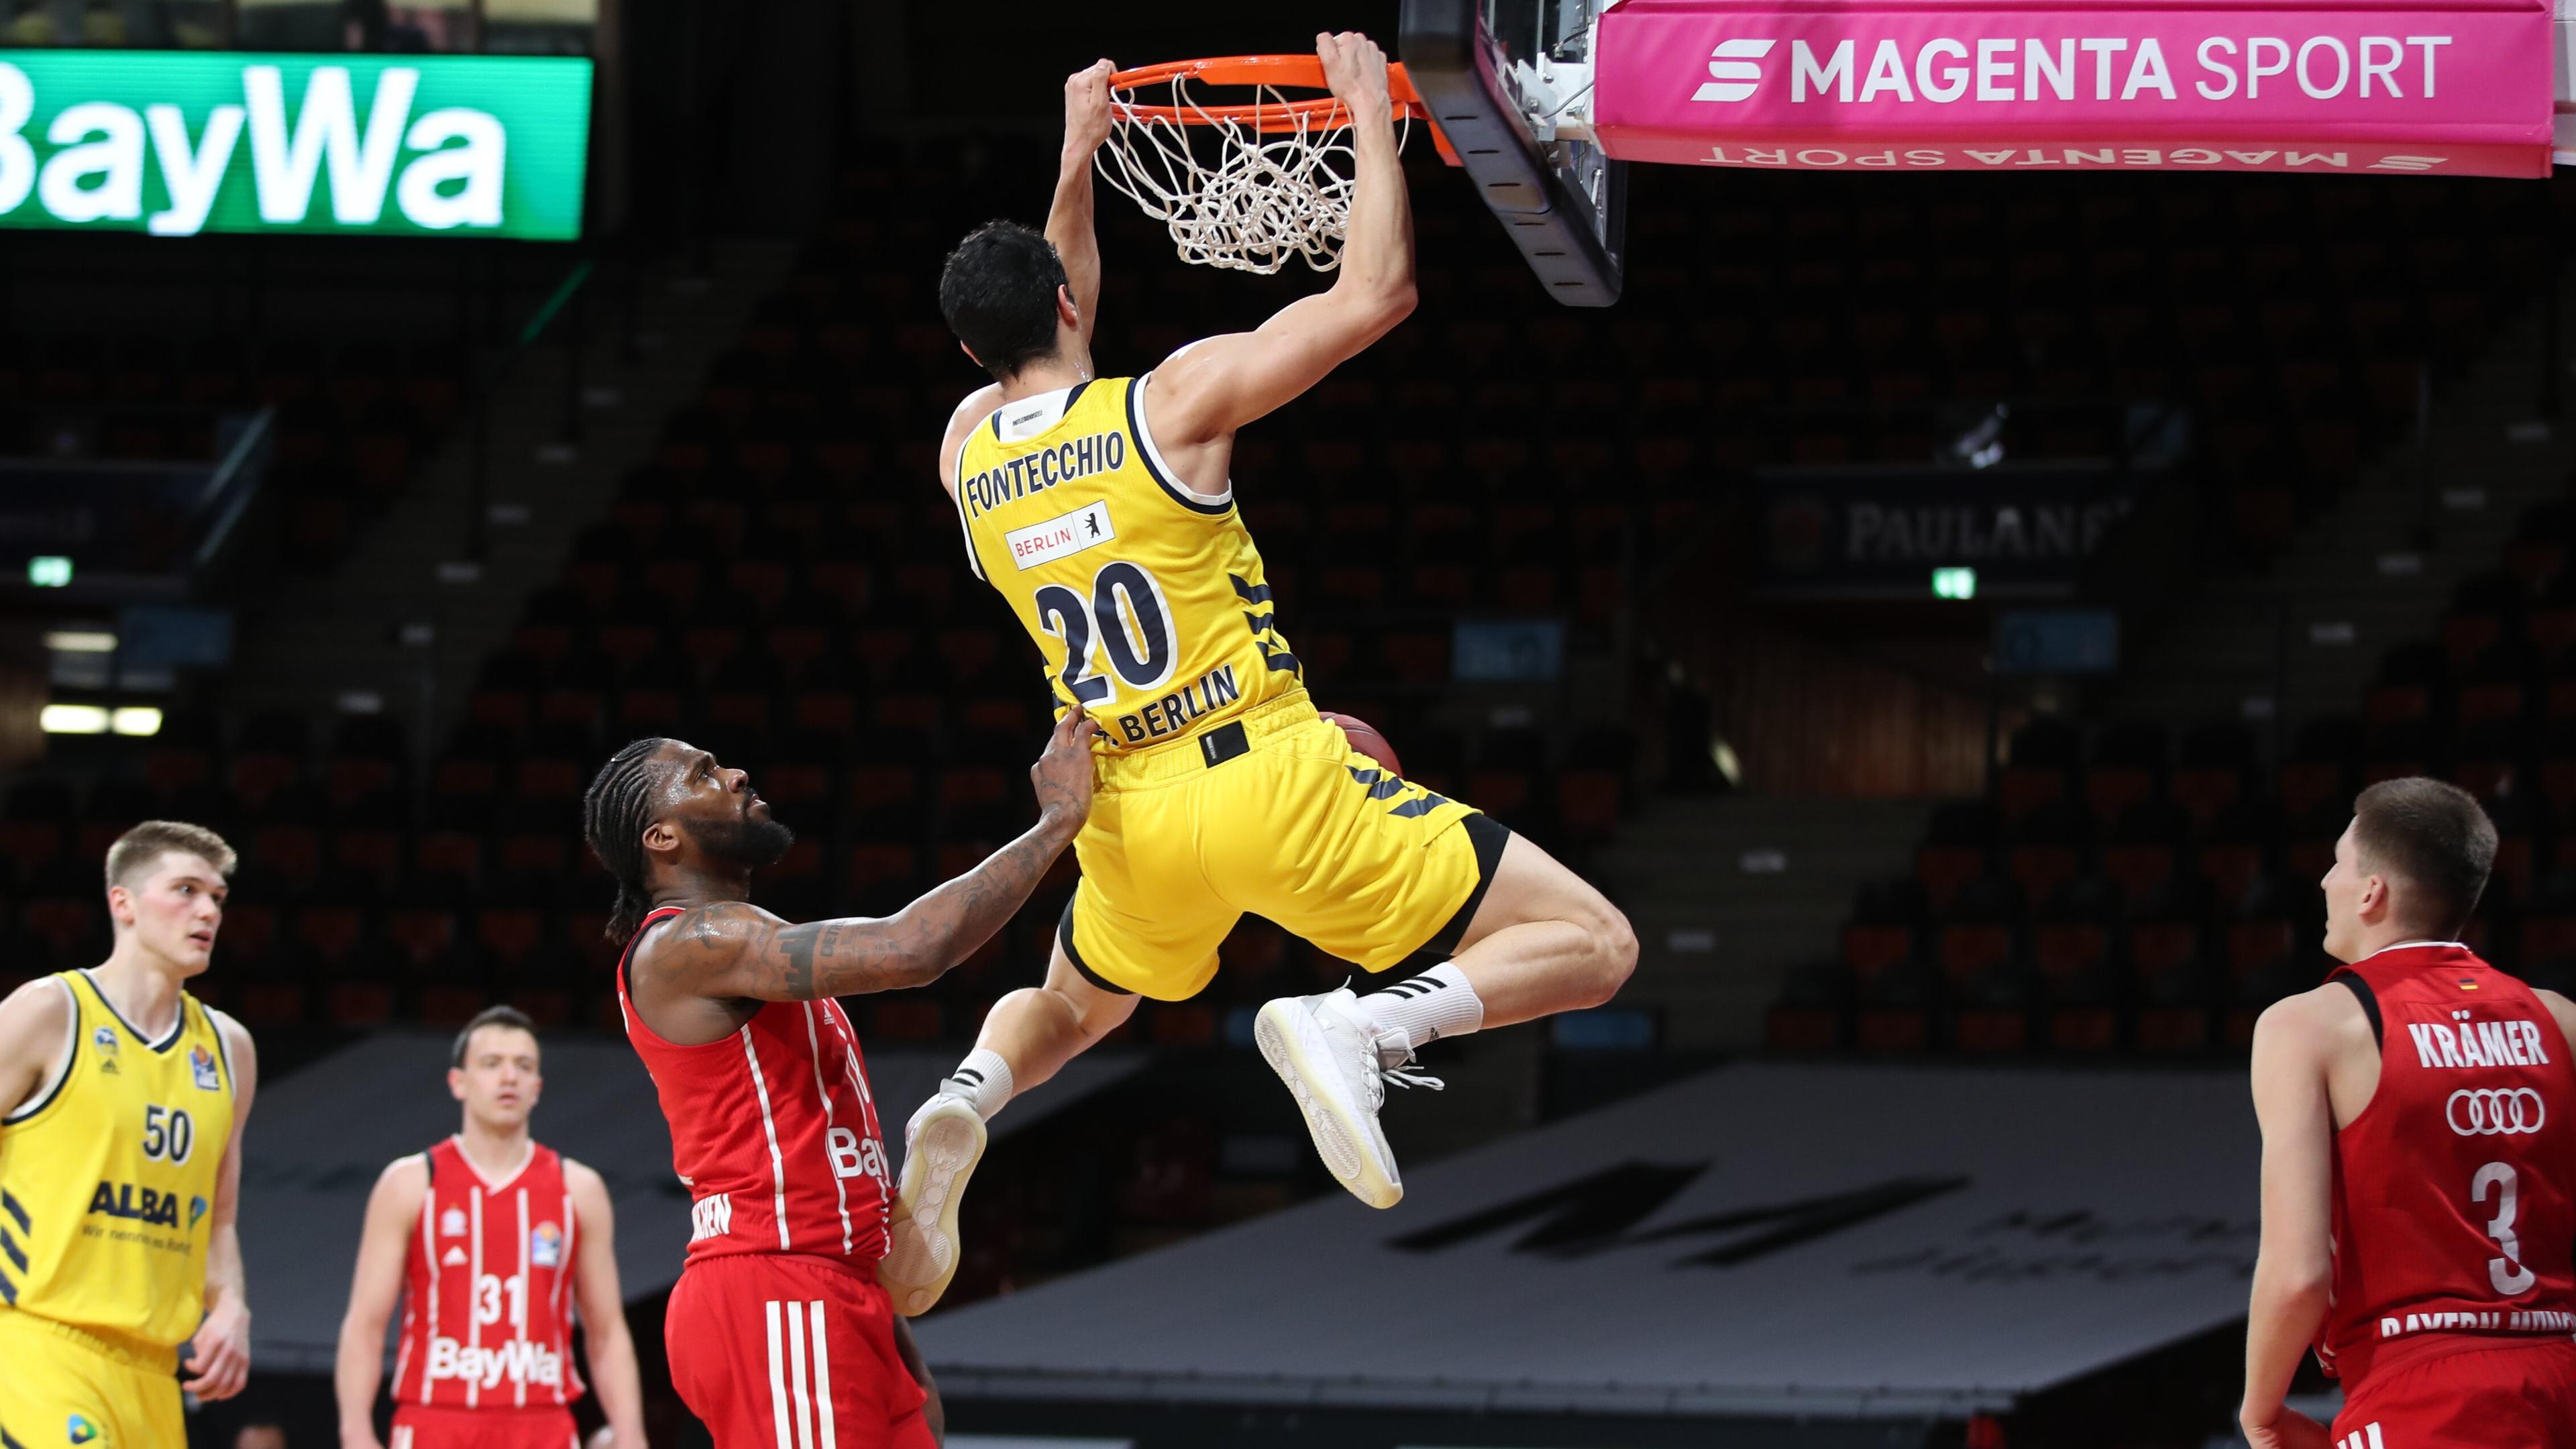 The 2020-21 MagentaSport BBL Pokal German Cup Top Four has been rescheduled and will be played on May 15-16 in Munich. The action on the court was highlighted by reigning league champions ALBA BERLIN blasting FC Bayern Munich on the road. The week also saw Rickey Paulding hit his 1,000 three-pointer in the German league and John Bryant grab his 3,000th rebound.